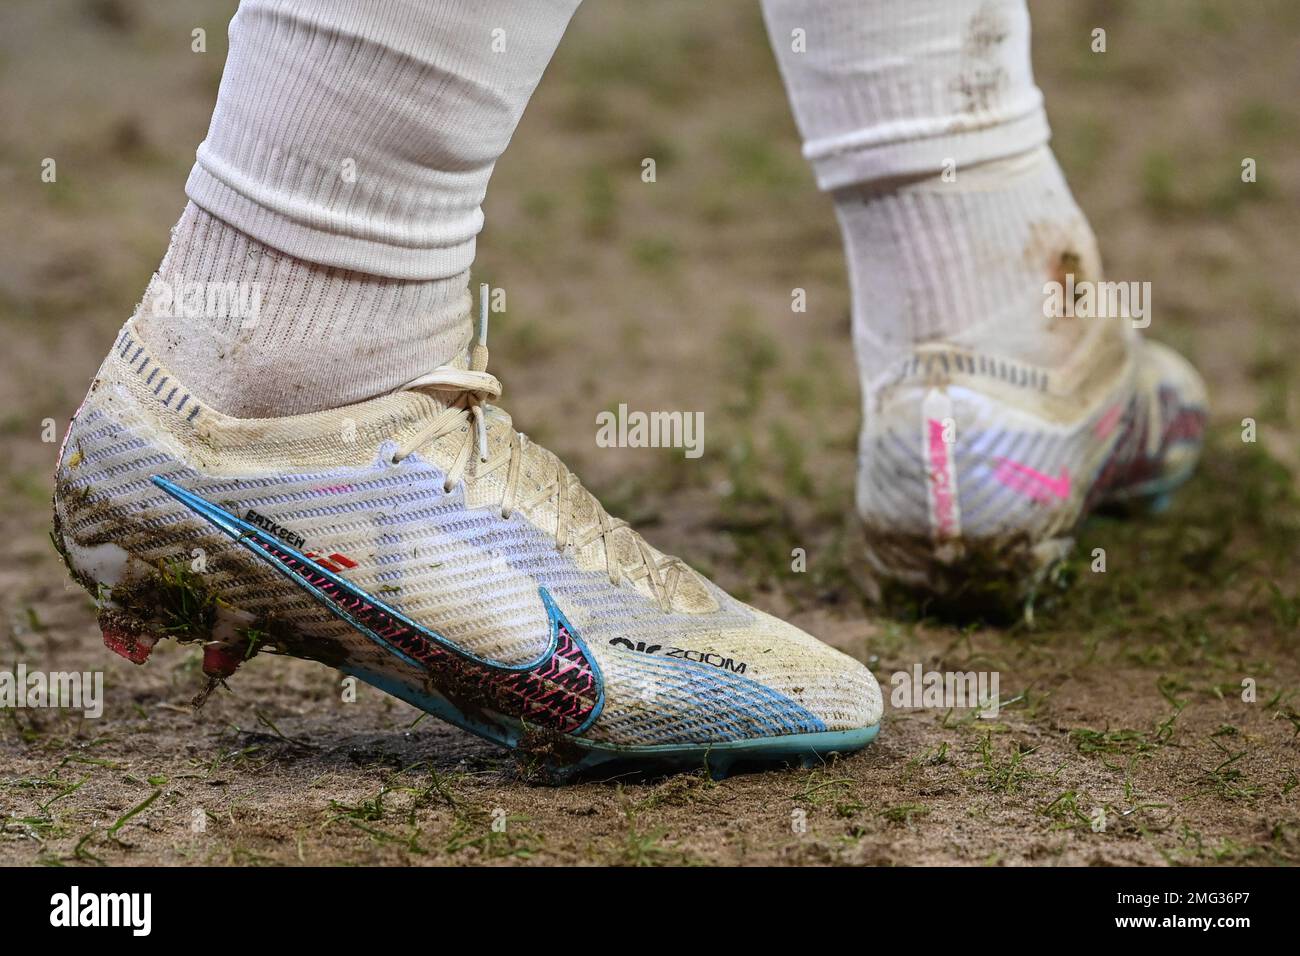 Nottingham, UK. 25th Jan, 2023. Nike Air football boots of Christian Eriksen #14 of Manchester United during the Carabao Cup Semi-Finals match Nottingham Forest vs Manchester United at City Ground, Nottingham,